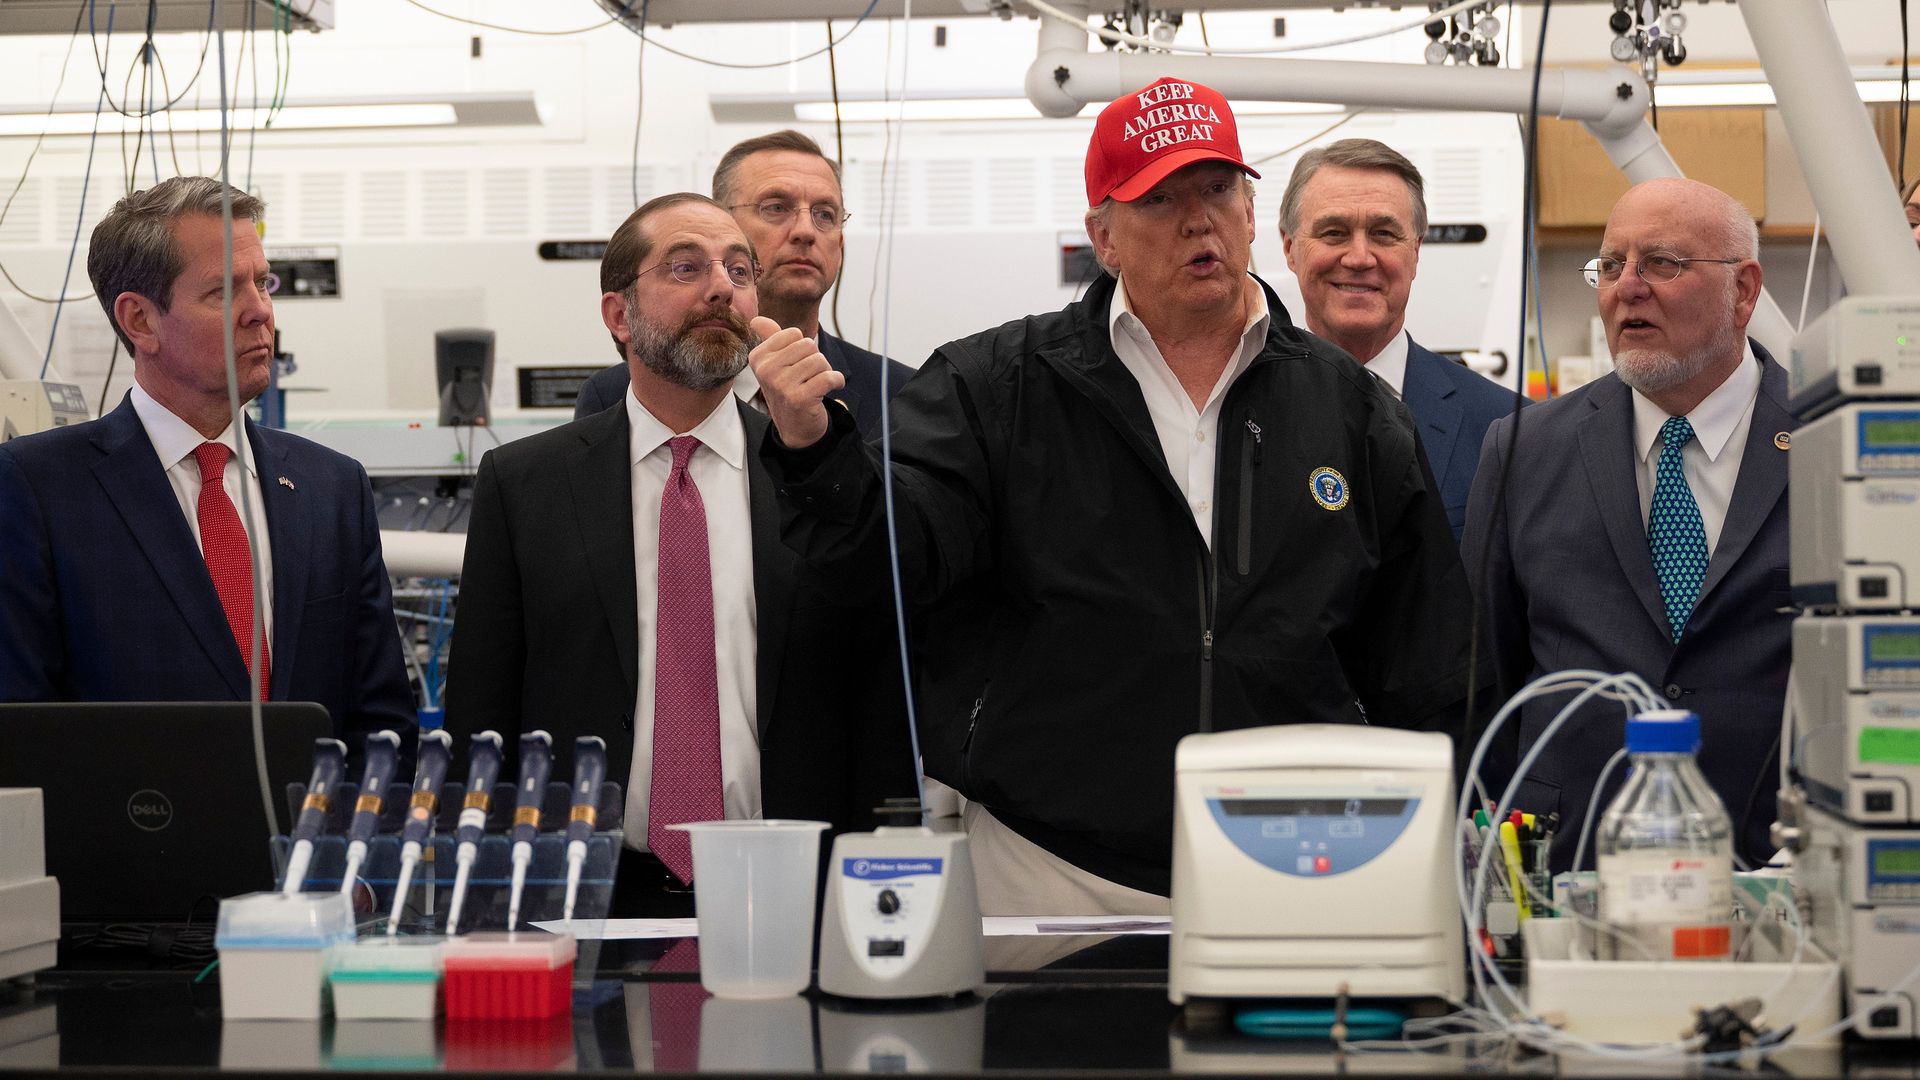 In this image, Trump stands in the middle of a group of men and talks